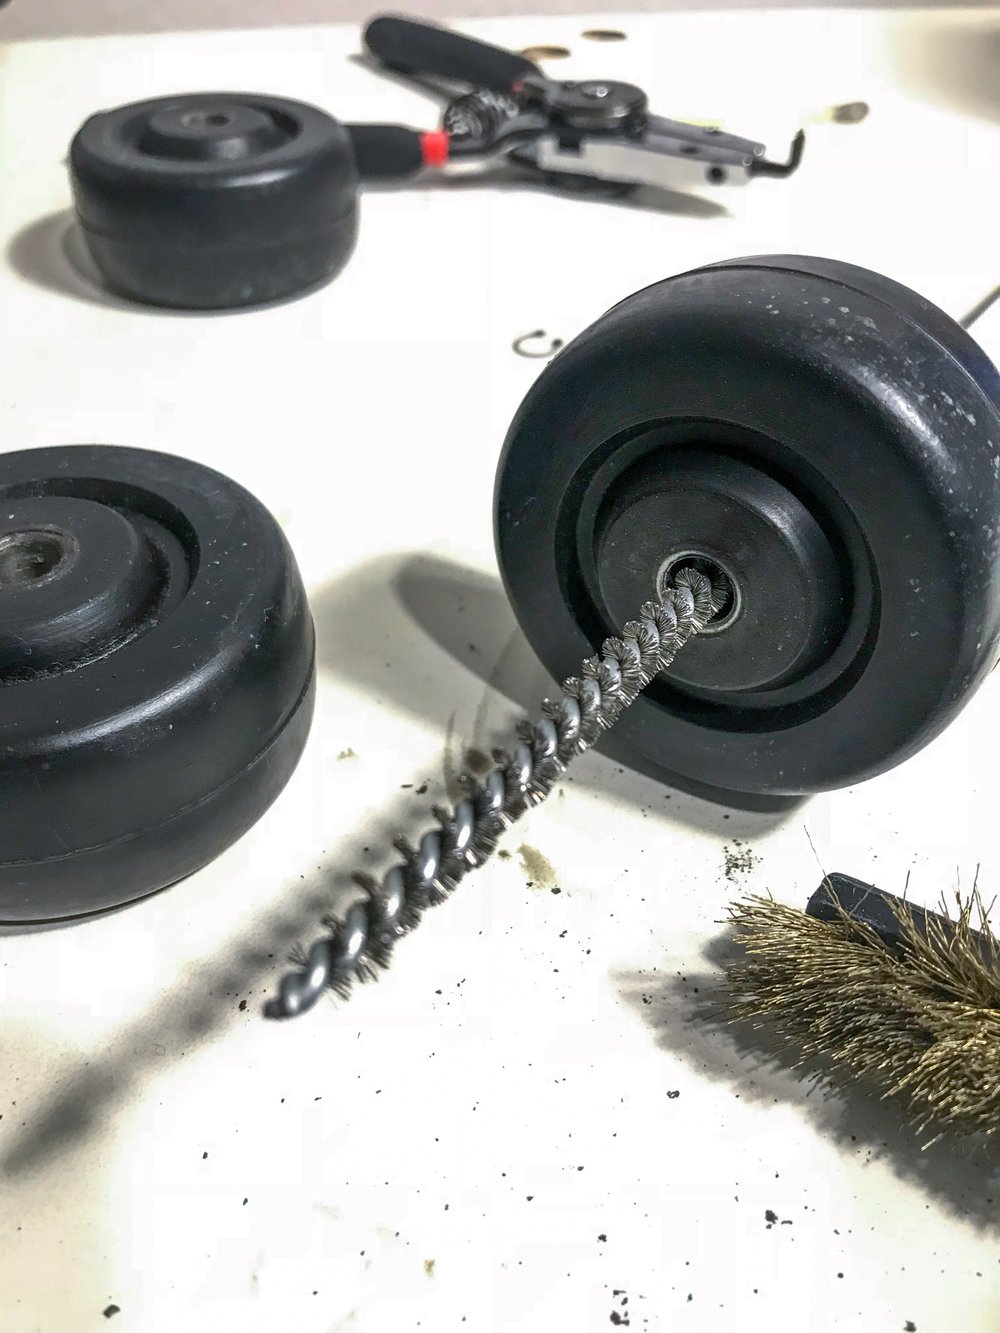  the wire brushes made it much easier to clean the debris stuck in the wheels.  